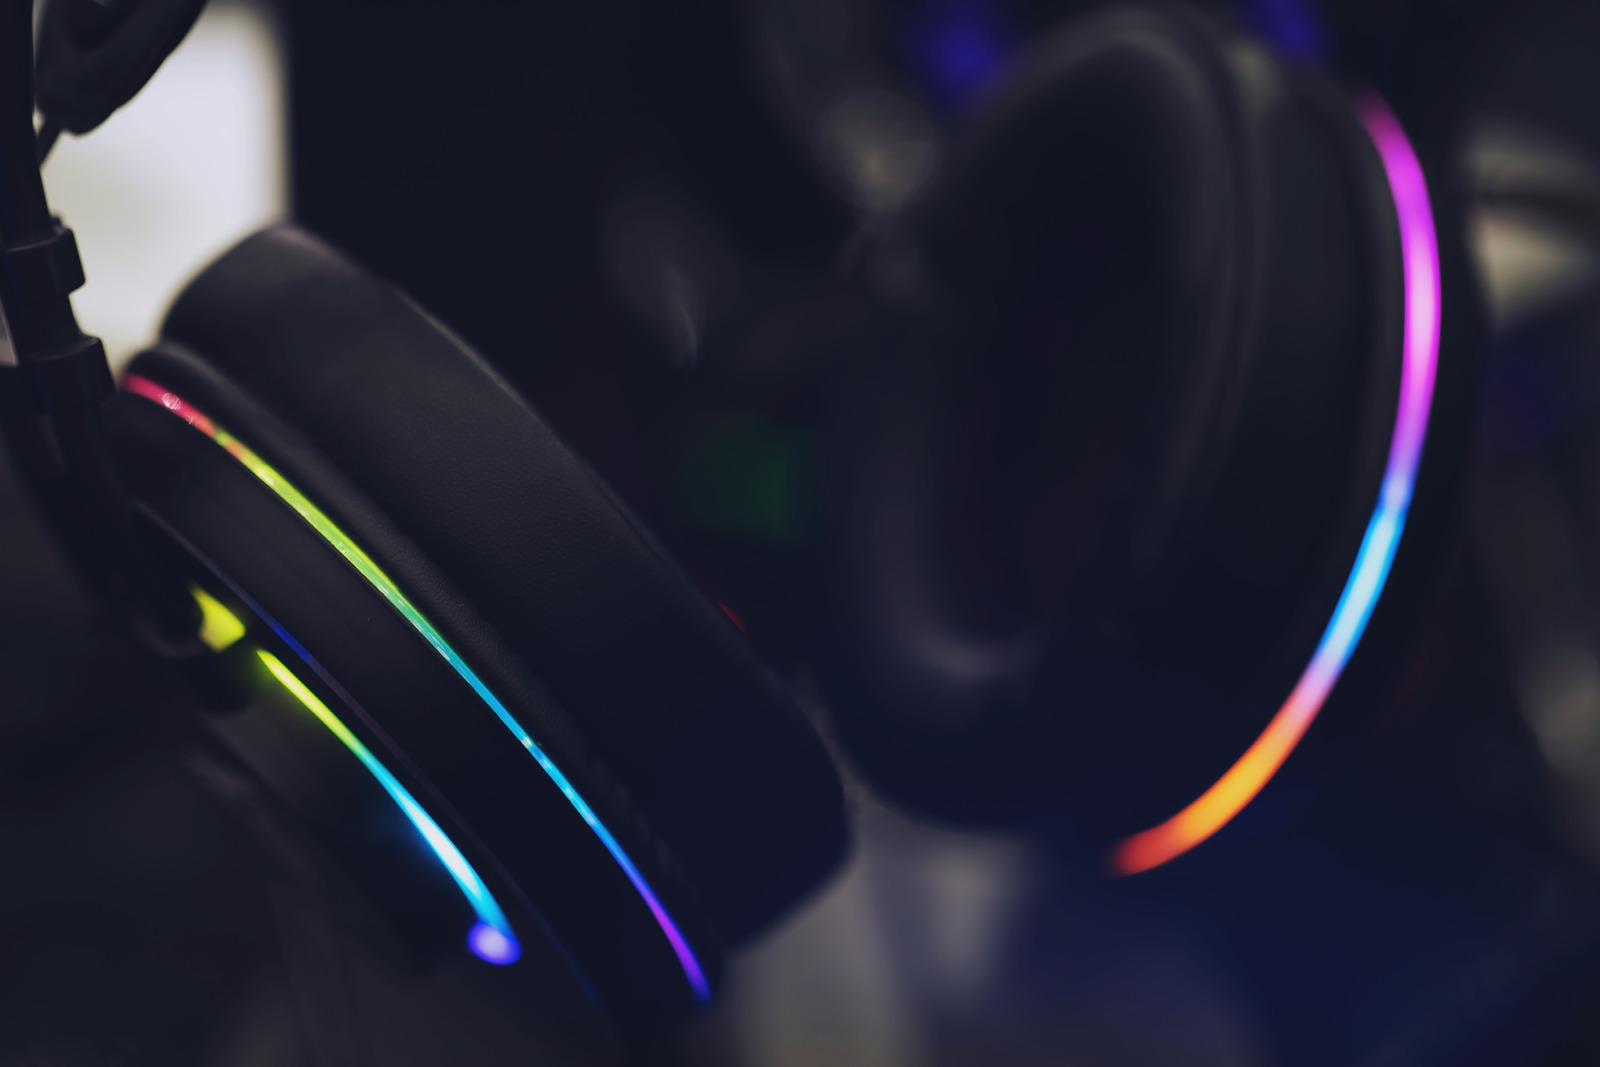 Close up of Computer RGB gaming headphones, Illuminated by colored LED